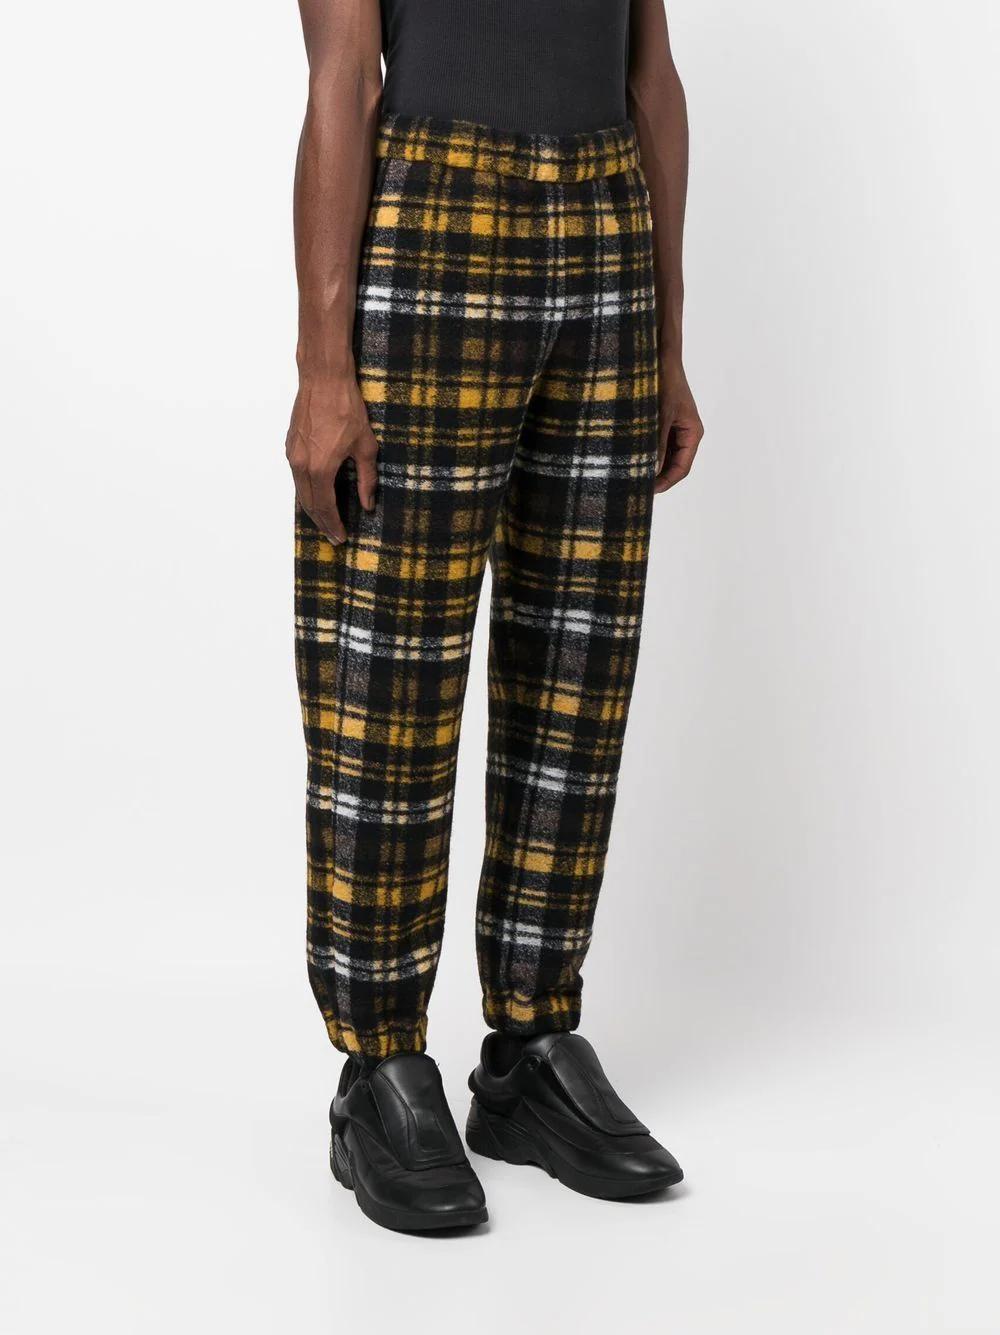 OC PATCH BONDED WOOL JOGGER MUSTARD BLAC